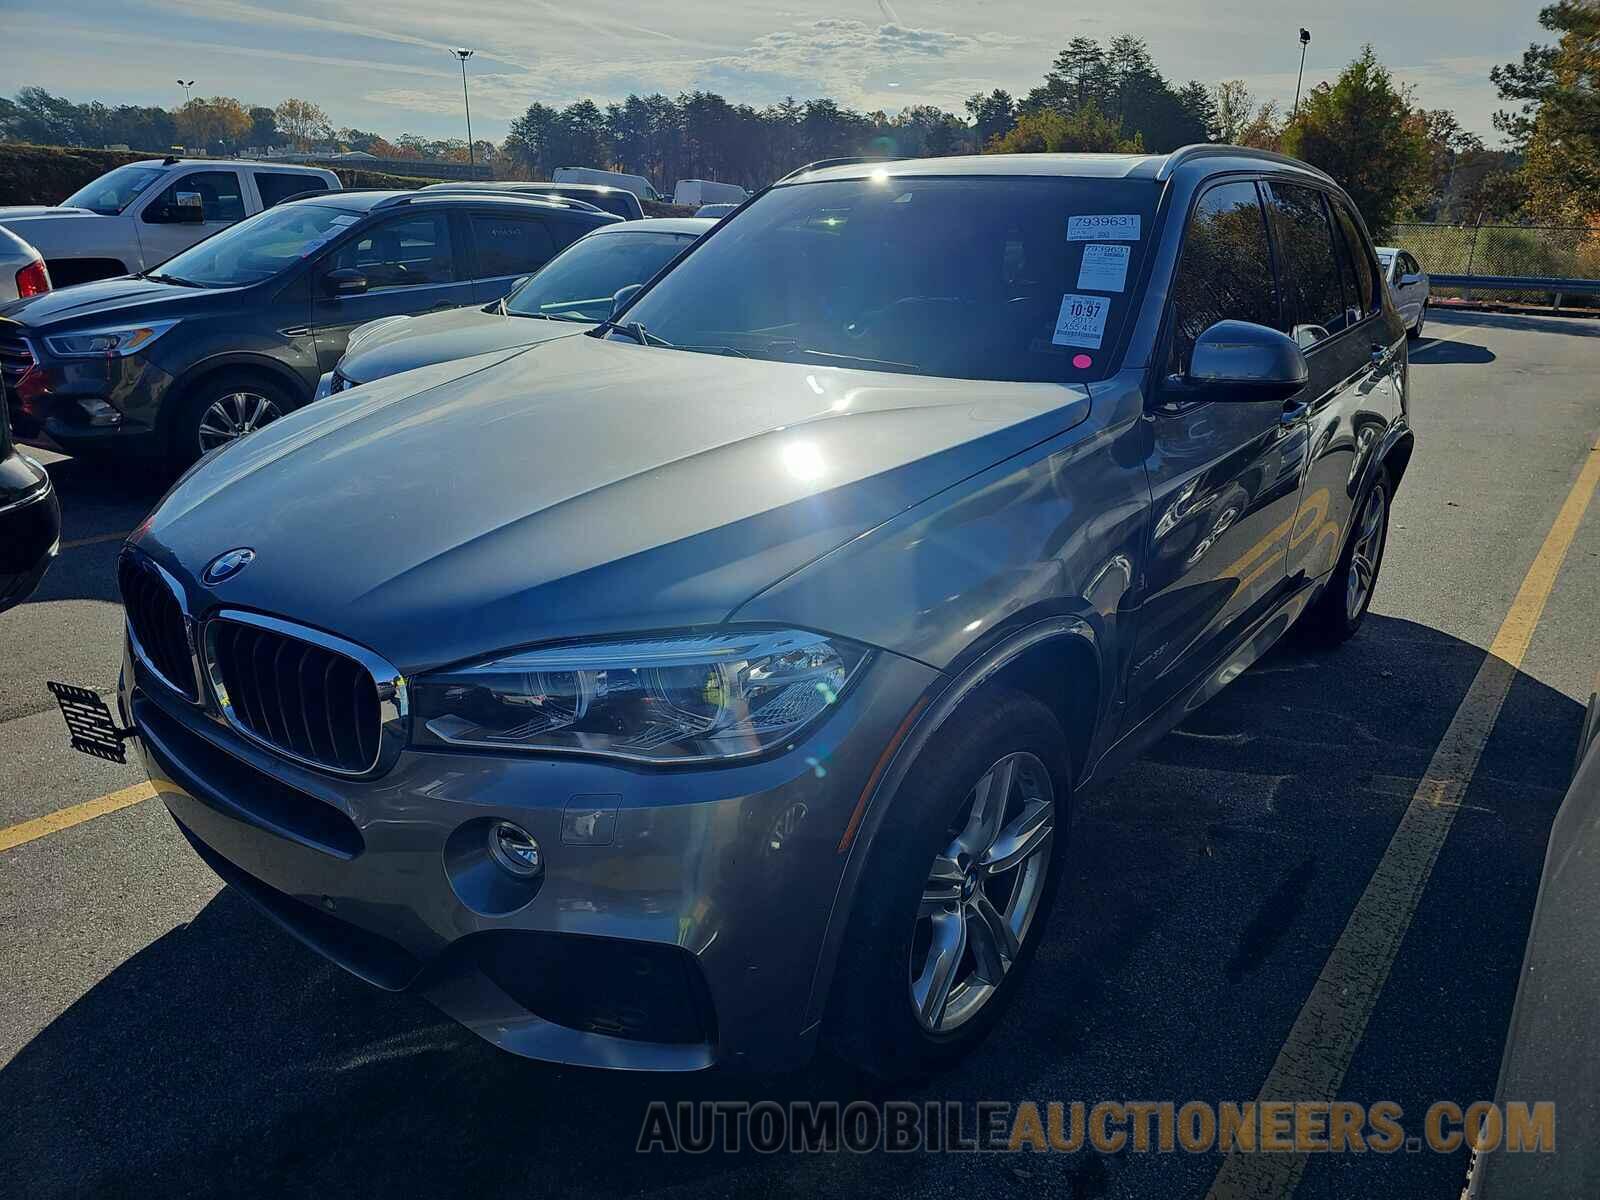 5UXKR0C37H0V81947 BMW X5 Sp 2017